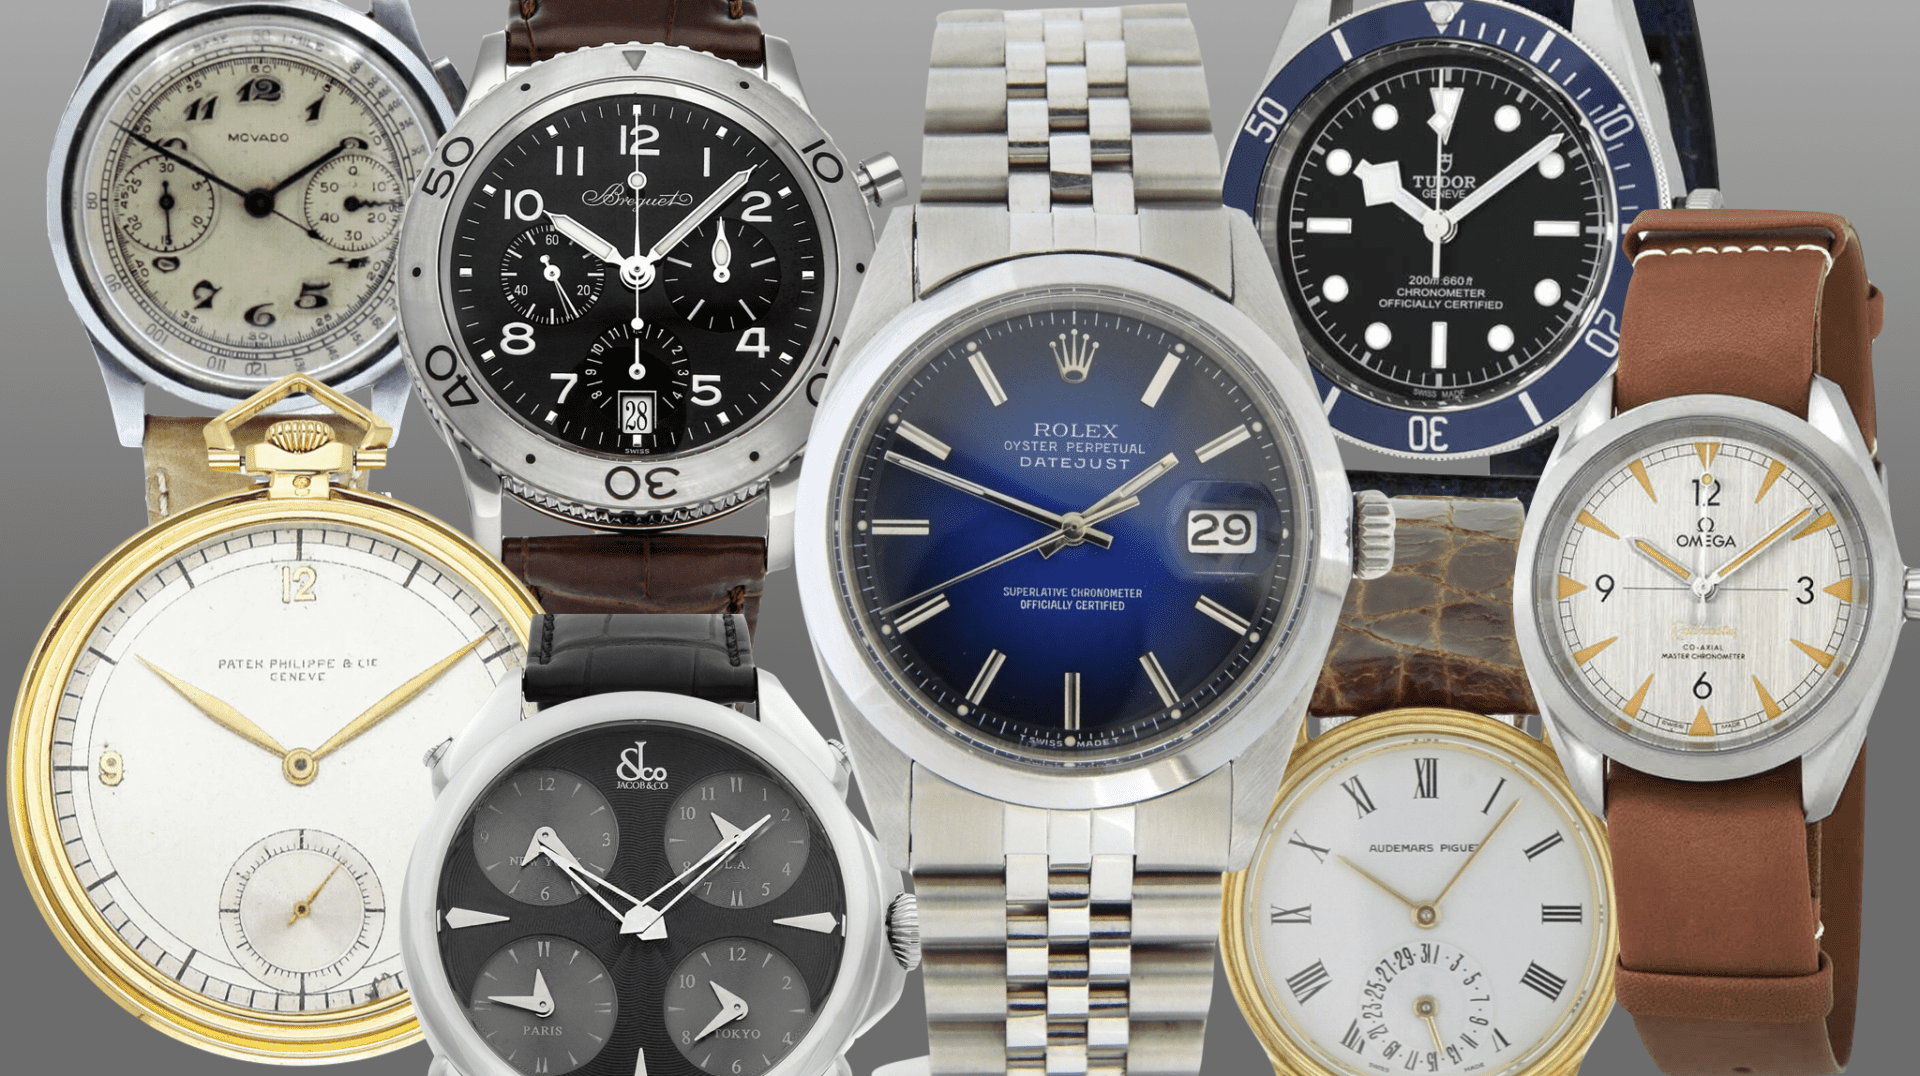 8 affordable watches on eBay right now for under $5k, including Patek Philippe and Jacob & Co